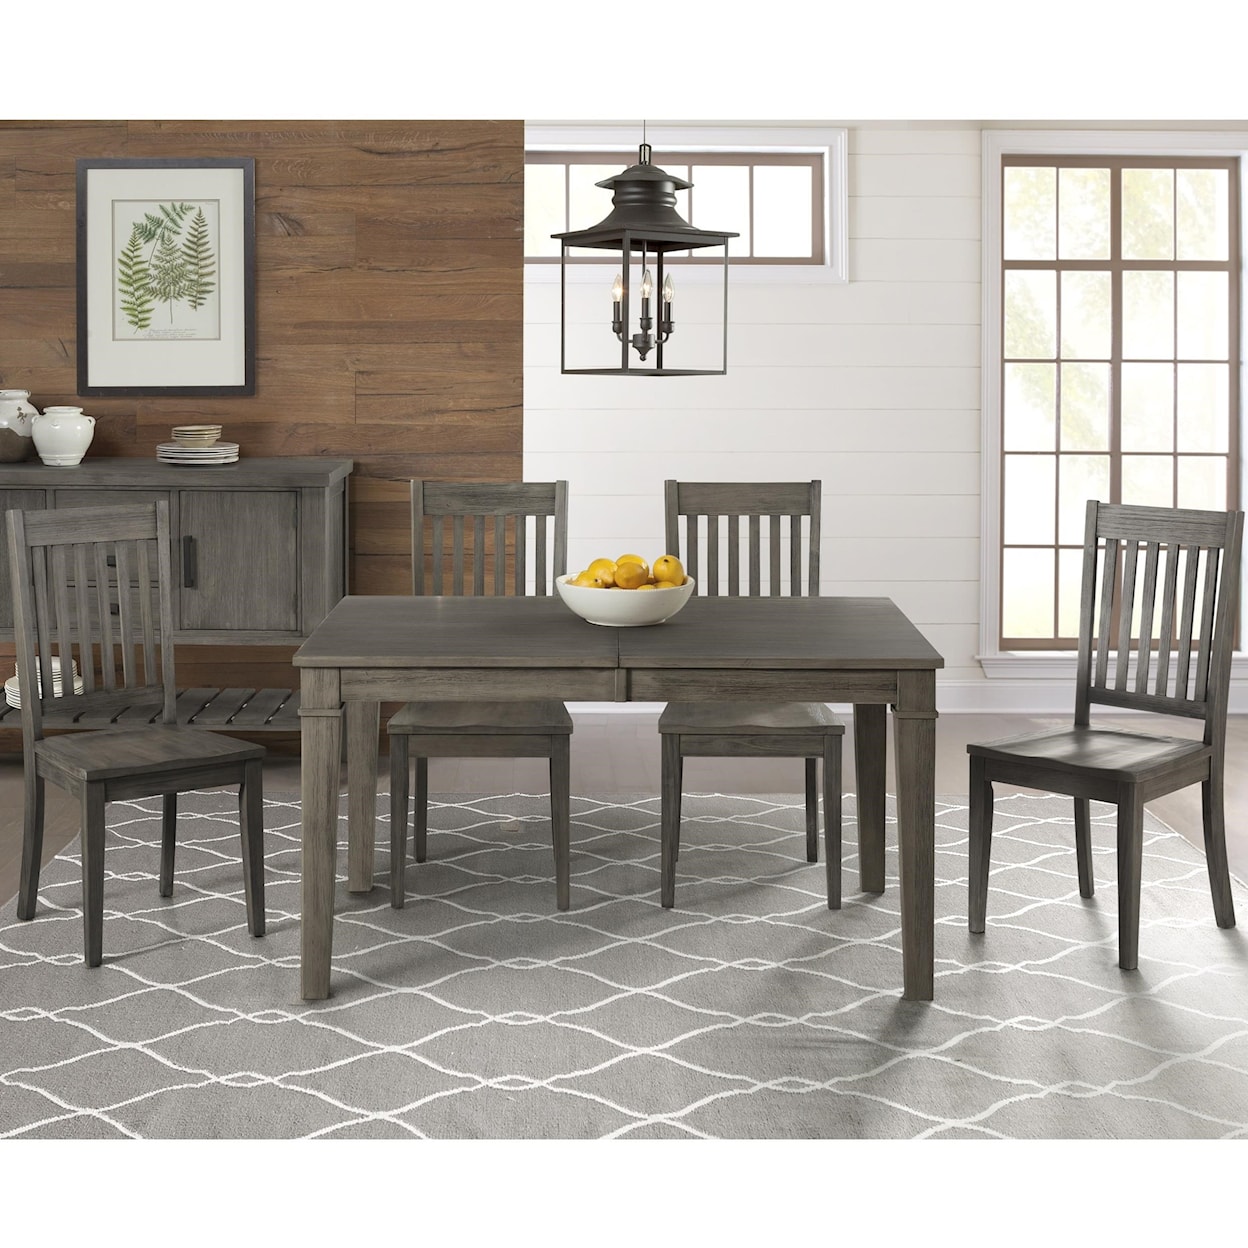 AAmerica Huron Table and Chair Set